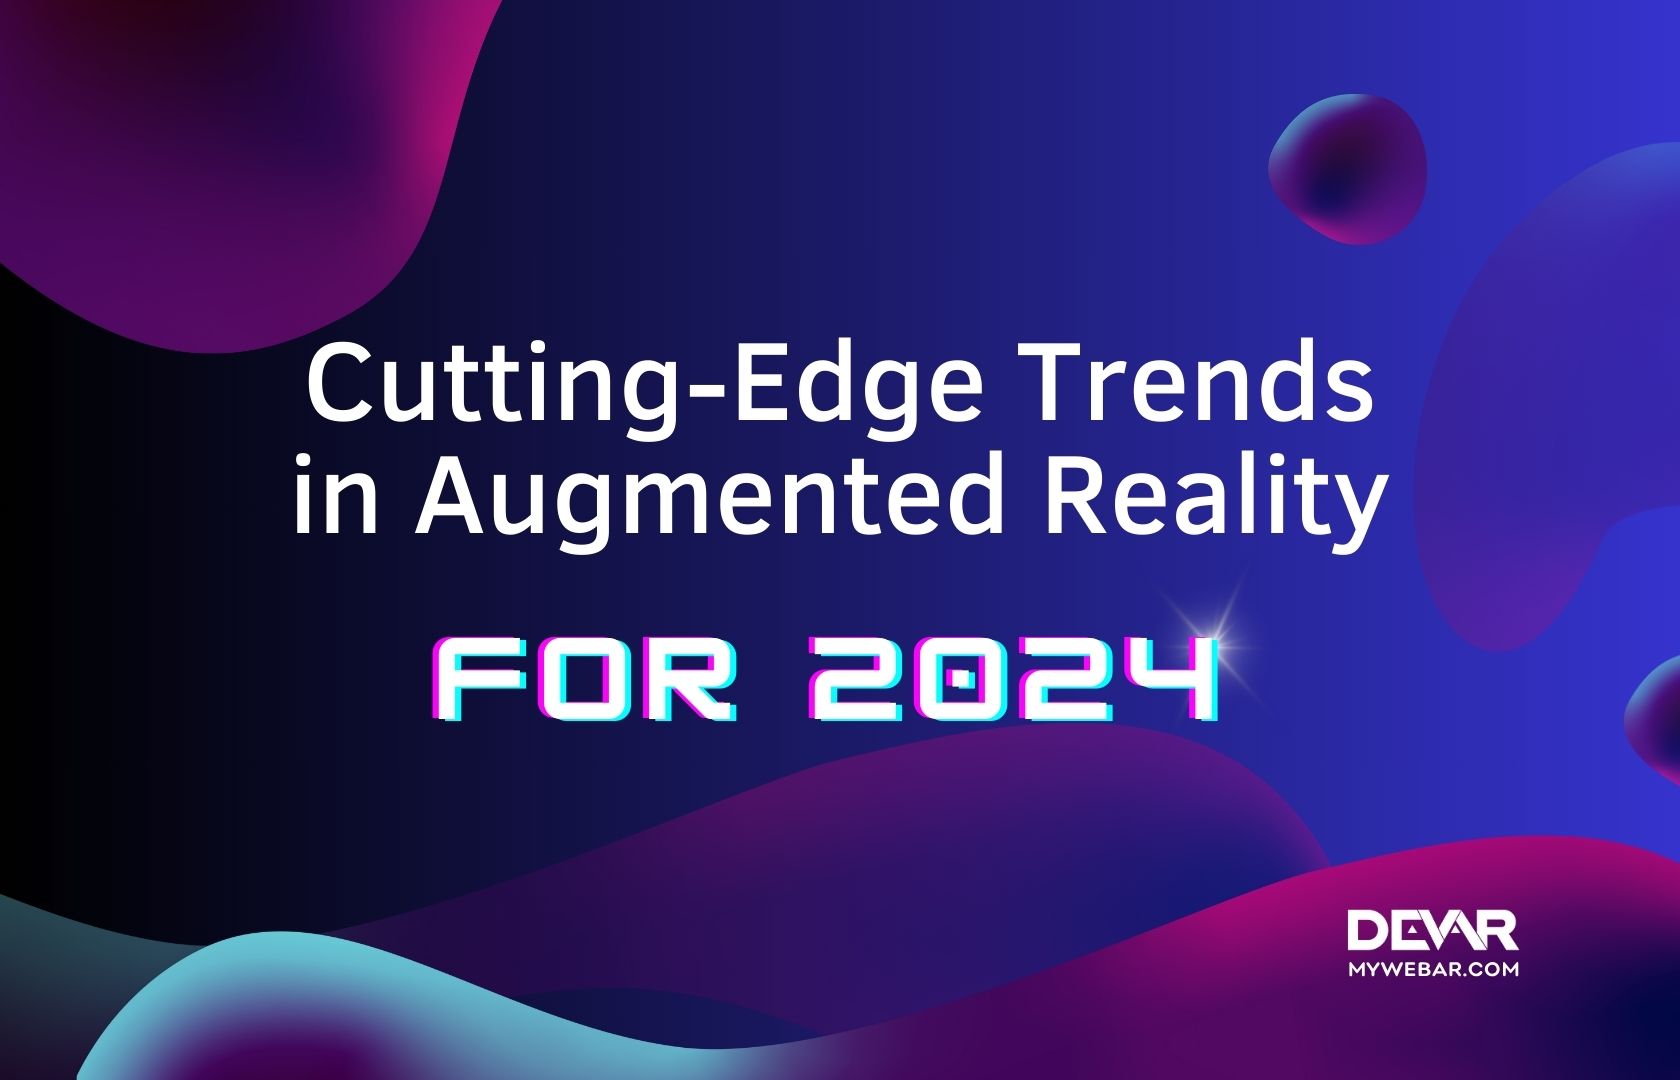 Cutting-Edge Trends in Augmented Reality for 2024